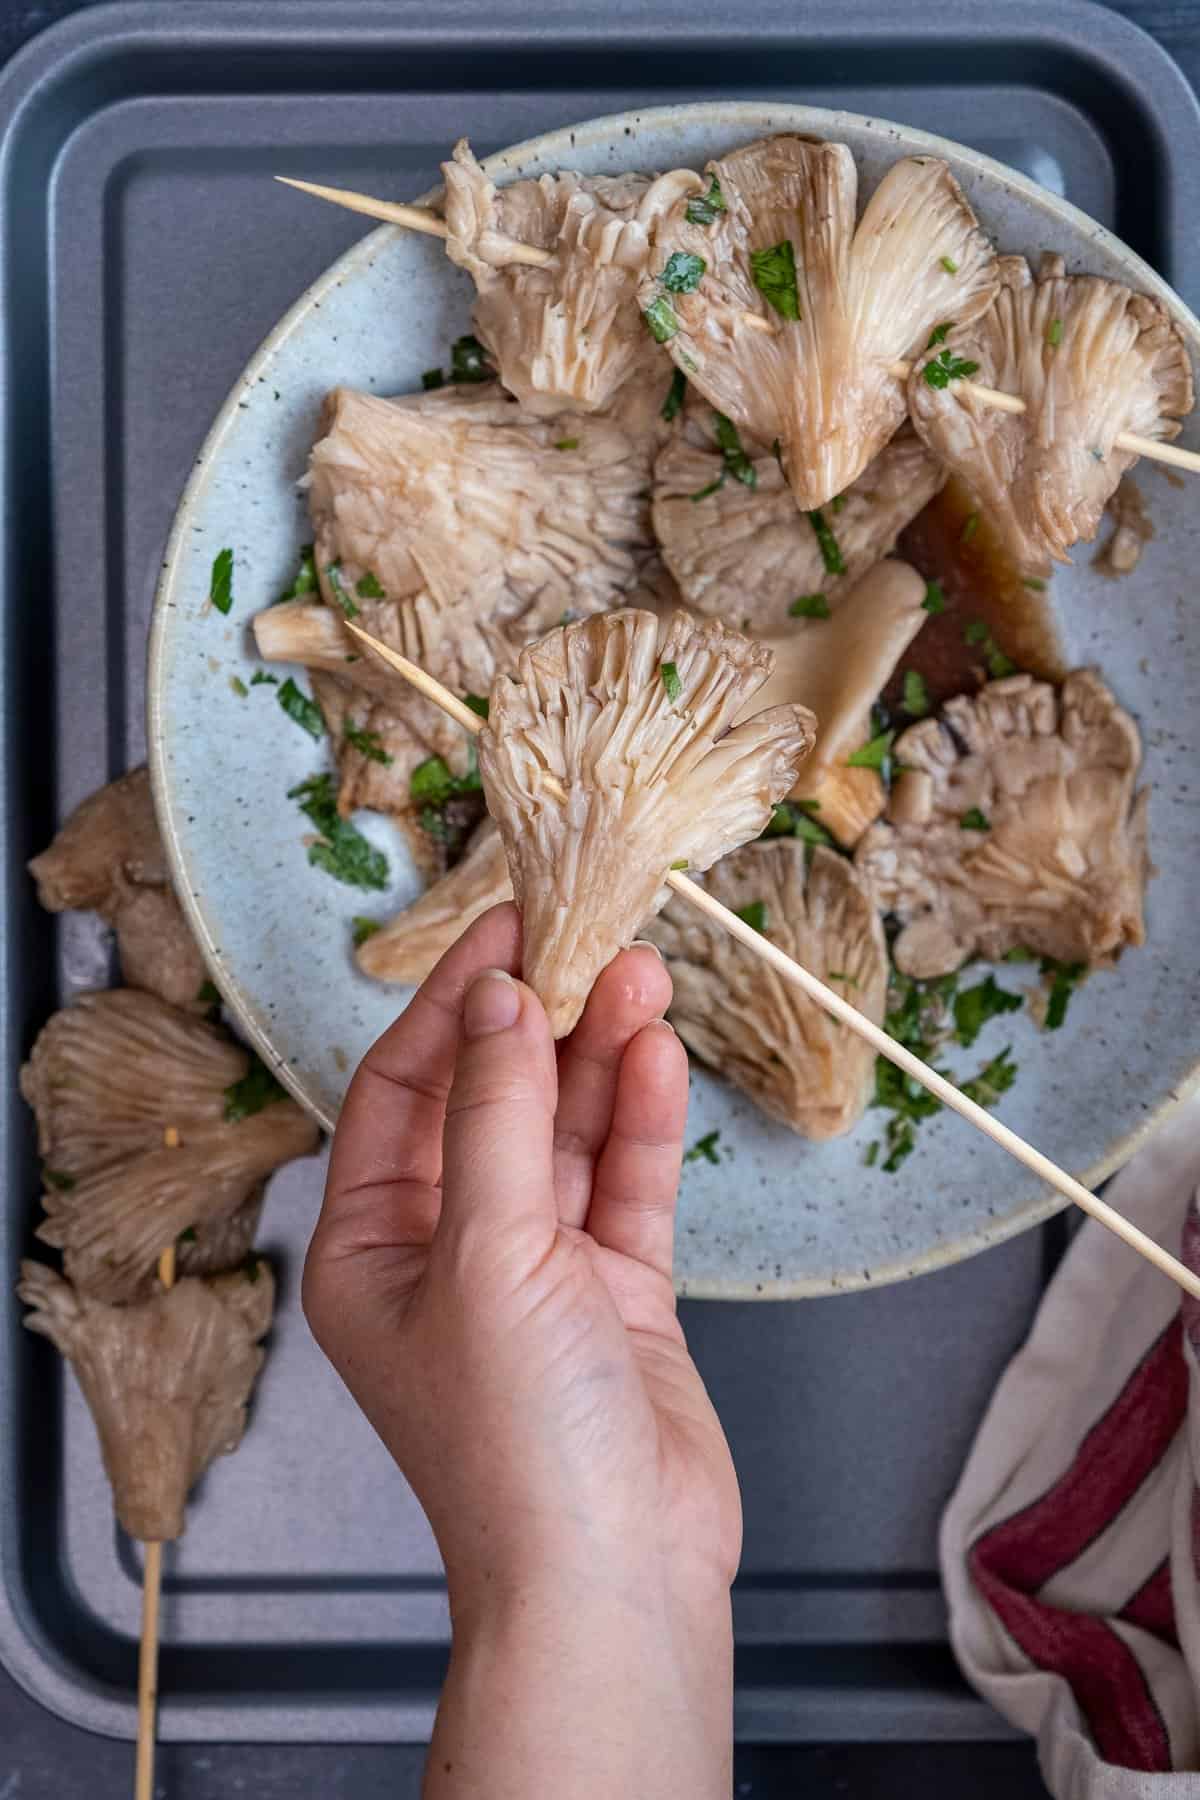 Hands threading marinated oyster mushrooms on wooden skewers.